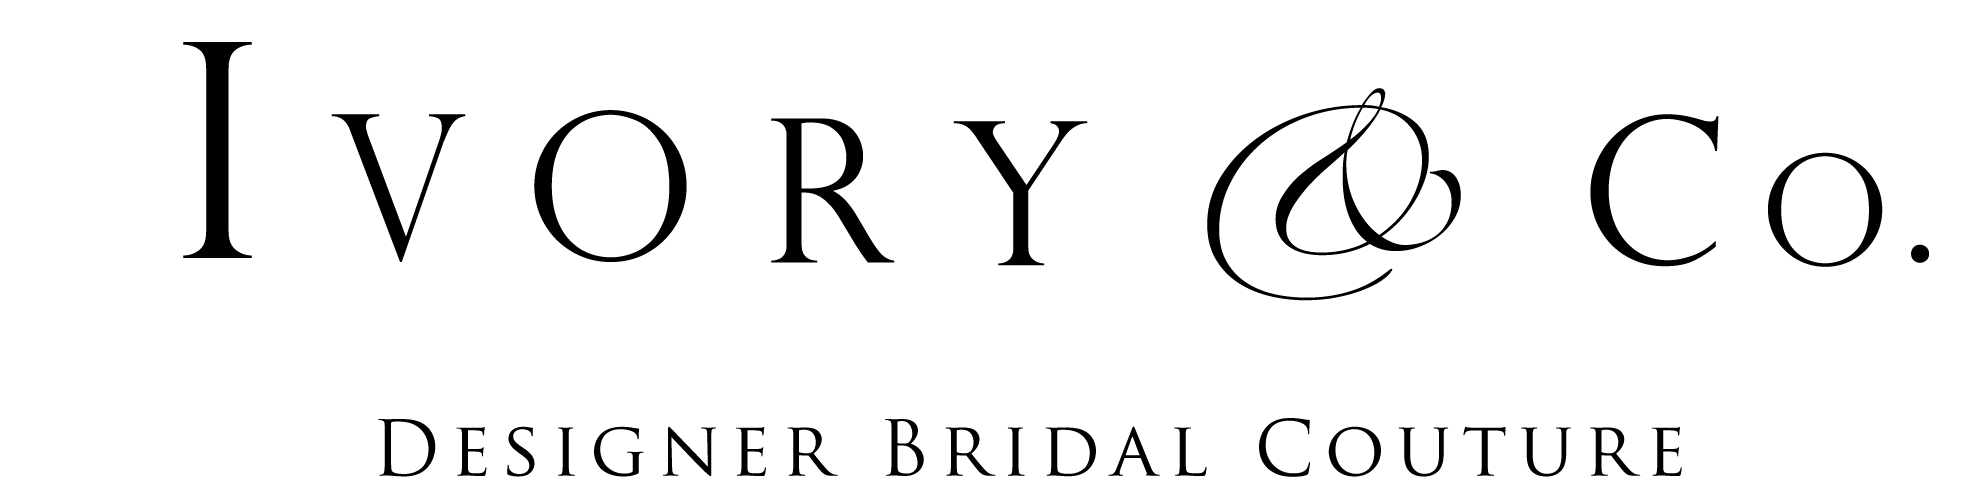 Bridal Couture Logo - Ivory & Co. - Silk designer bridal gowns